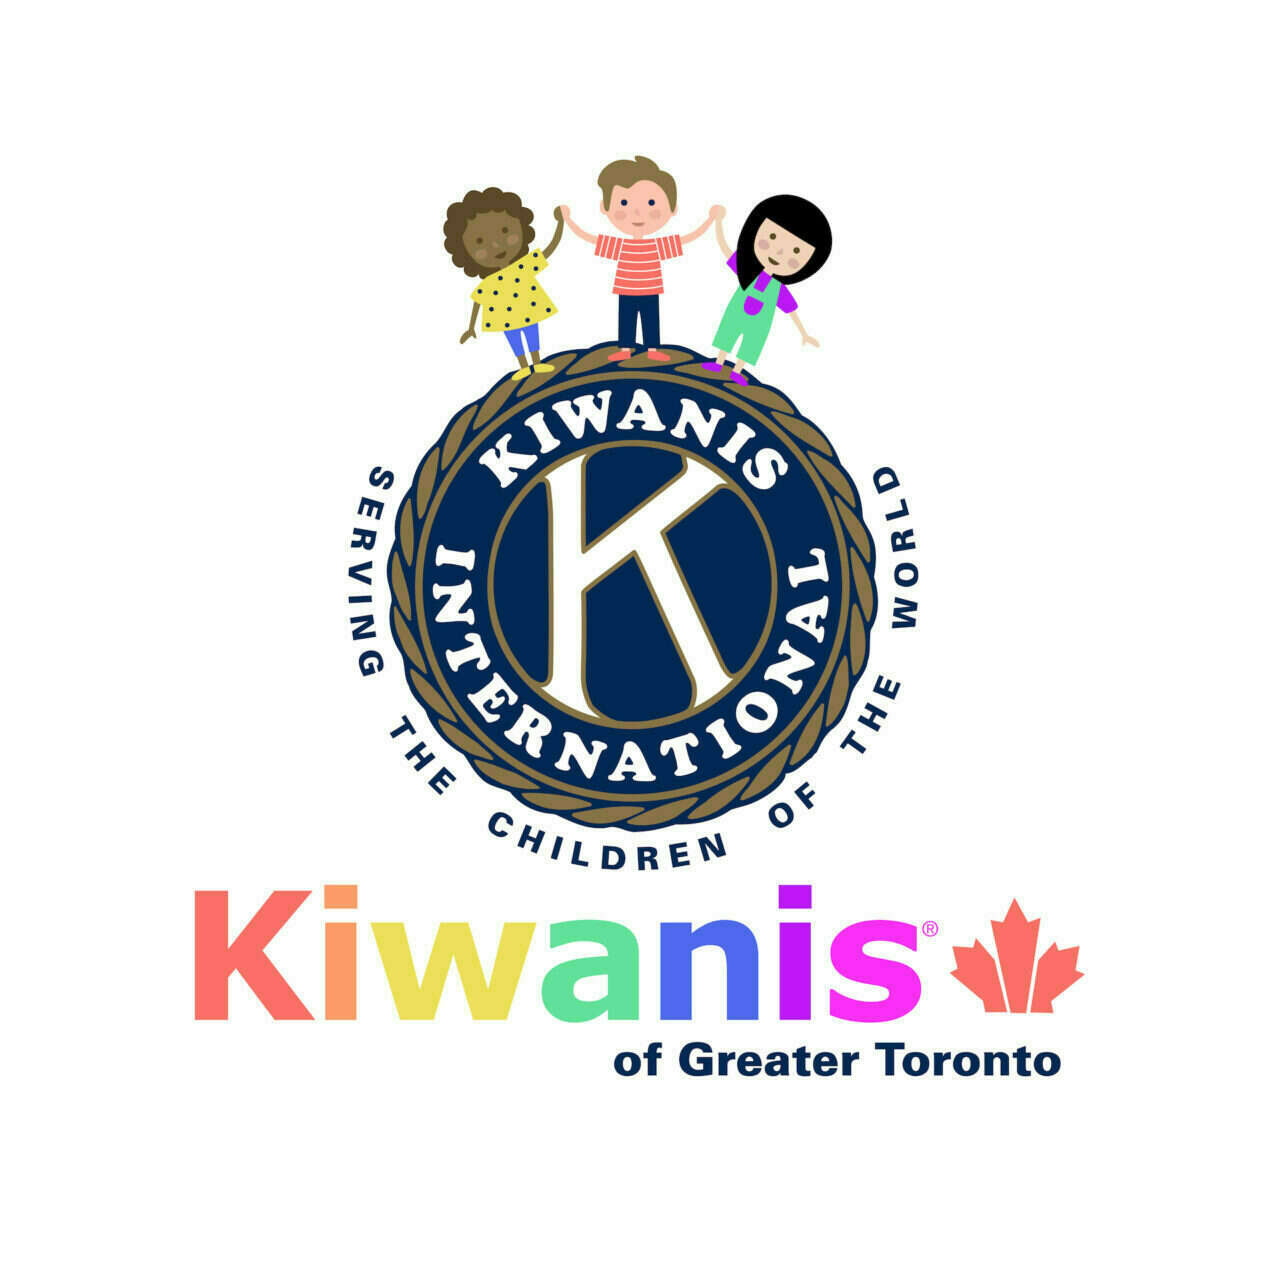 Kiwanis Clubs in the Greater Toronto area provide key financial and volunteer support